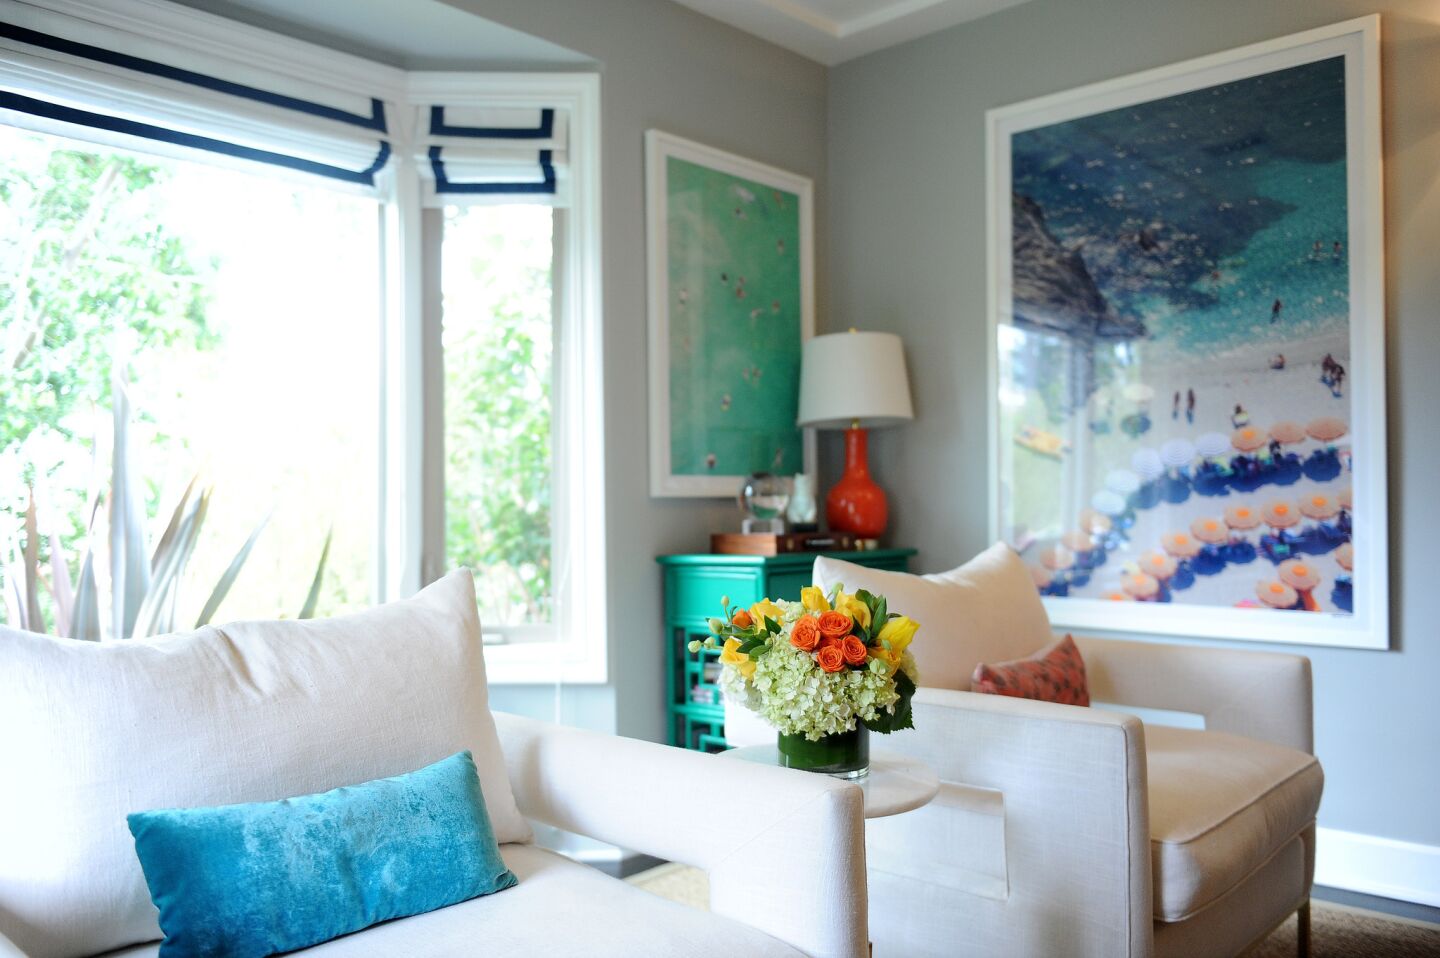 Designer Orlando Soria from Home Polish helped Malin and Richardson decorate. In the living room, the white bordered window shades by Neal Bernardino and upholstered armchairs add sophistication to a room with bright splashes of color.